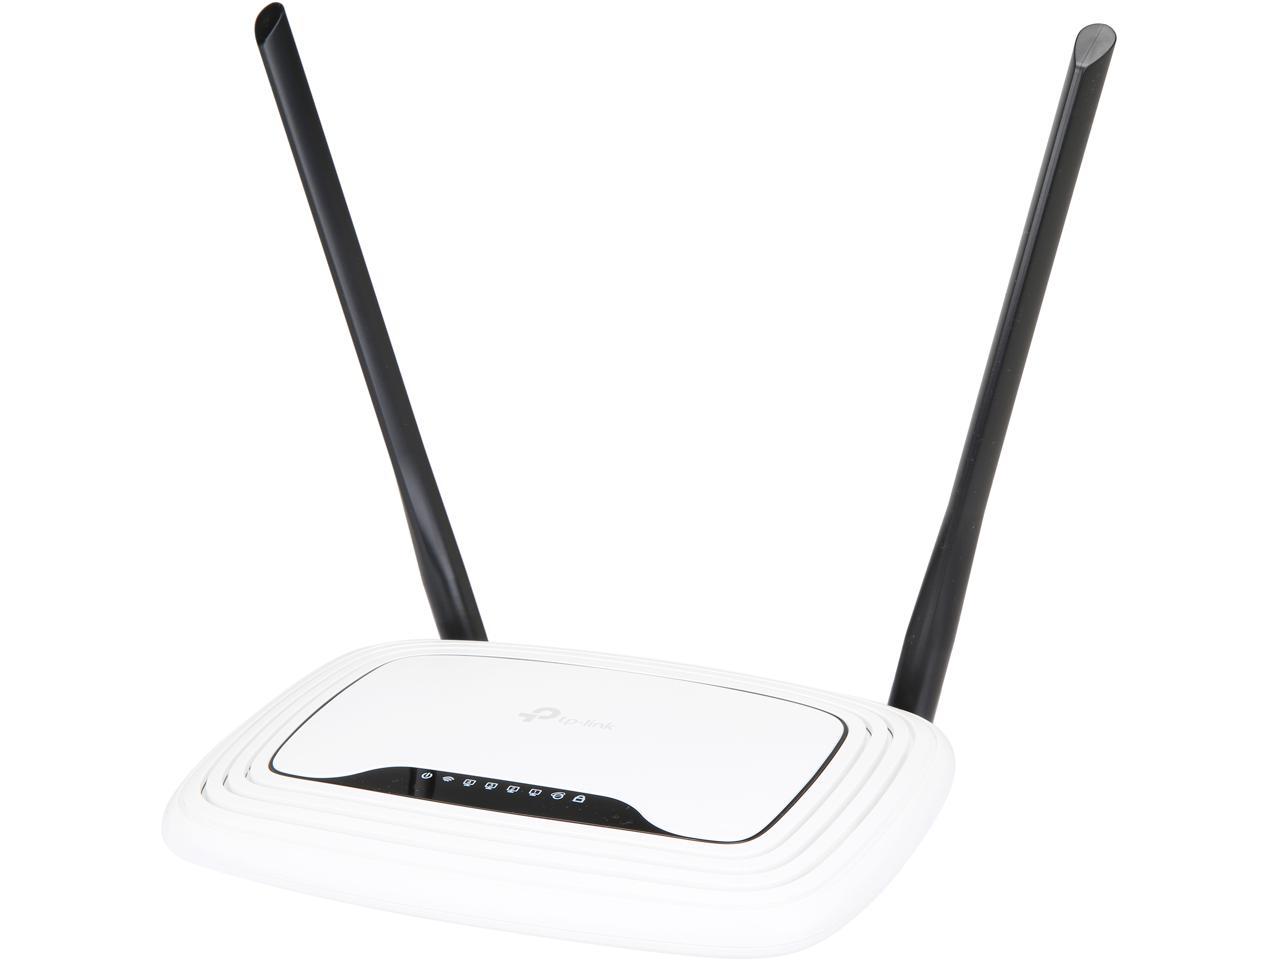 stamme Medicinsk fest TP-Link N300 Wireless Extender, Wi-Fi Router (TL-WR841N) - 2 x 5dBi High  Power Antennas, Supports Access Point, WISP, Up to 300M